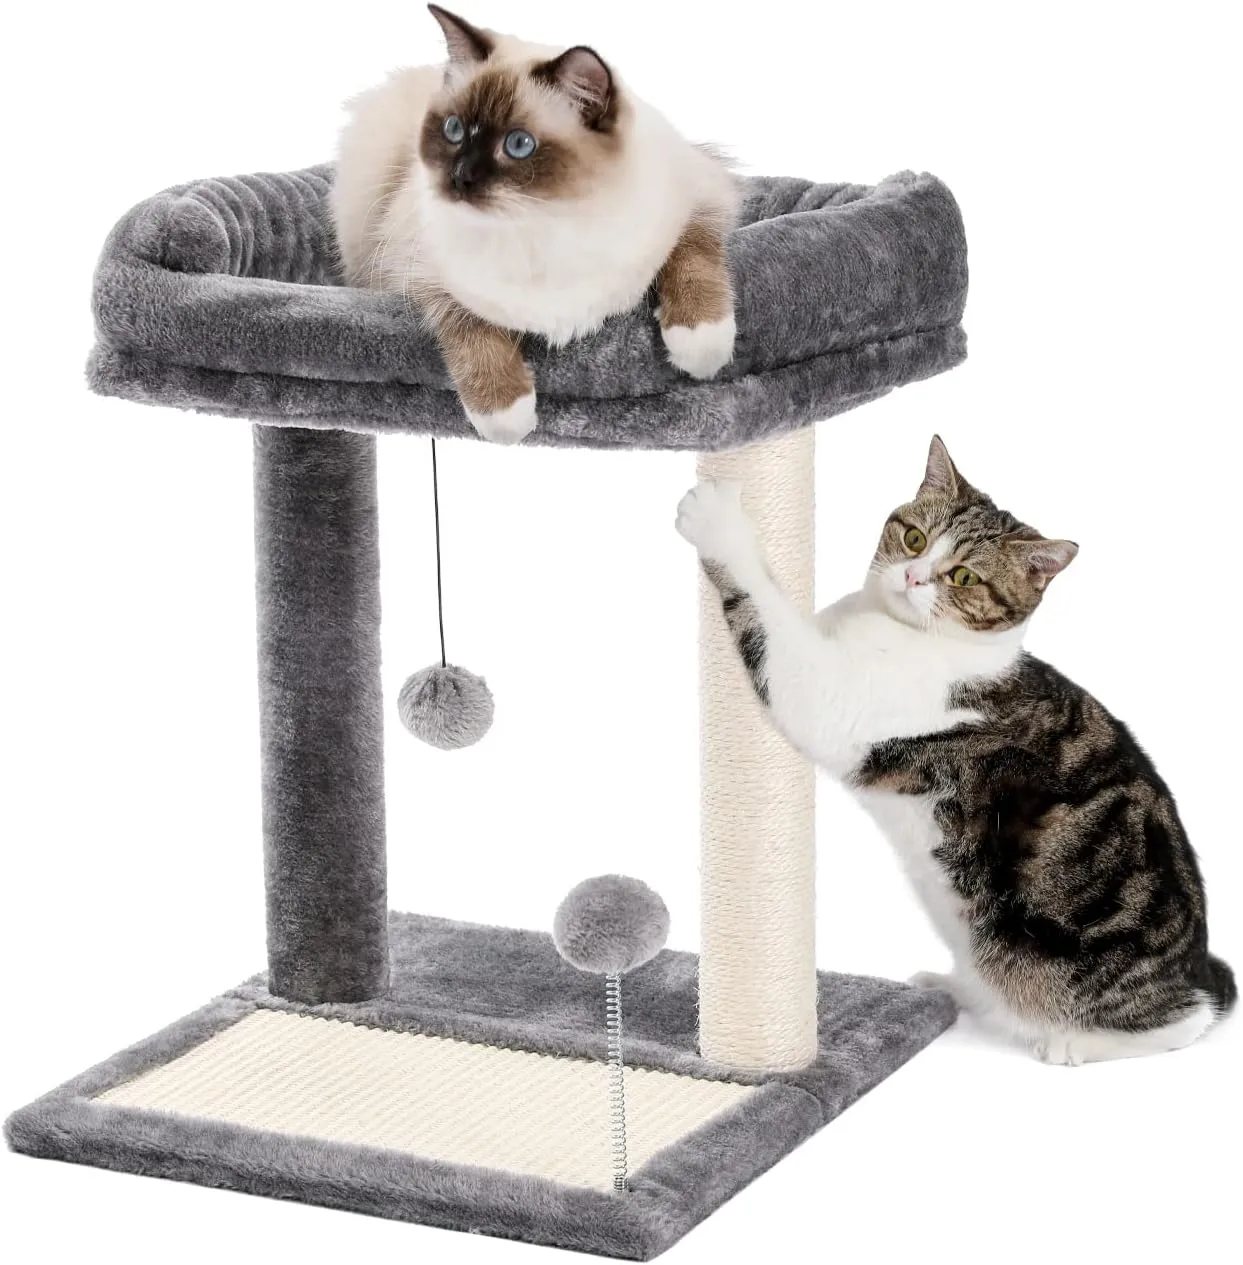 PAWZ Road Cat Scratching Post Bed, Featuring with Soft Perch Sisal-Covered Scratch Posts and Pads with Play Ball Great for Kittens and Cats